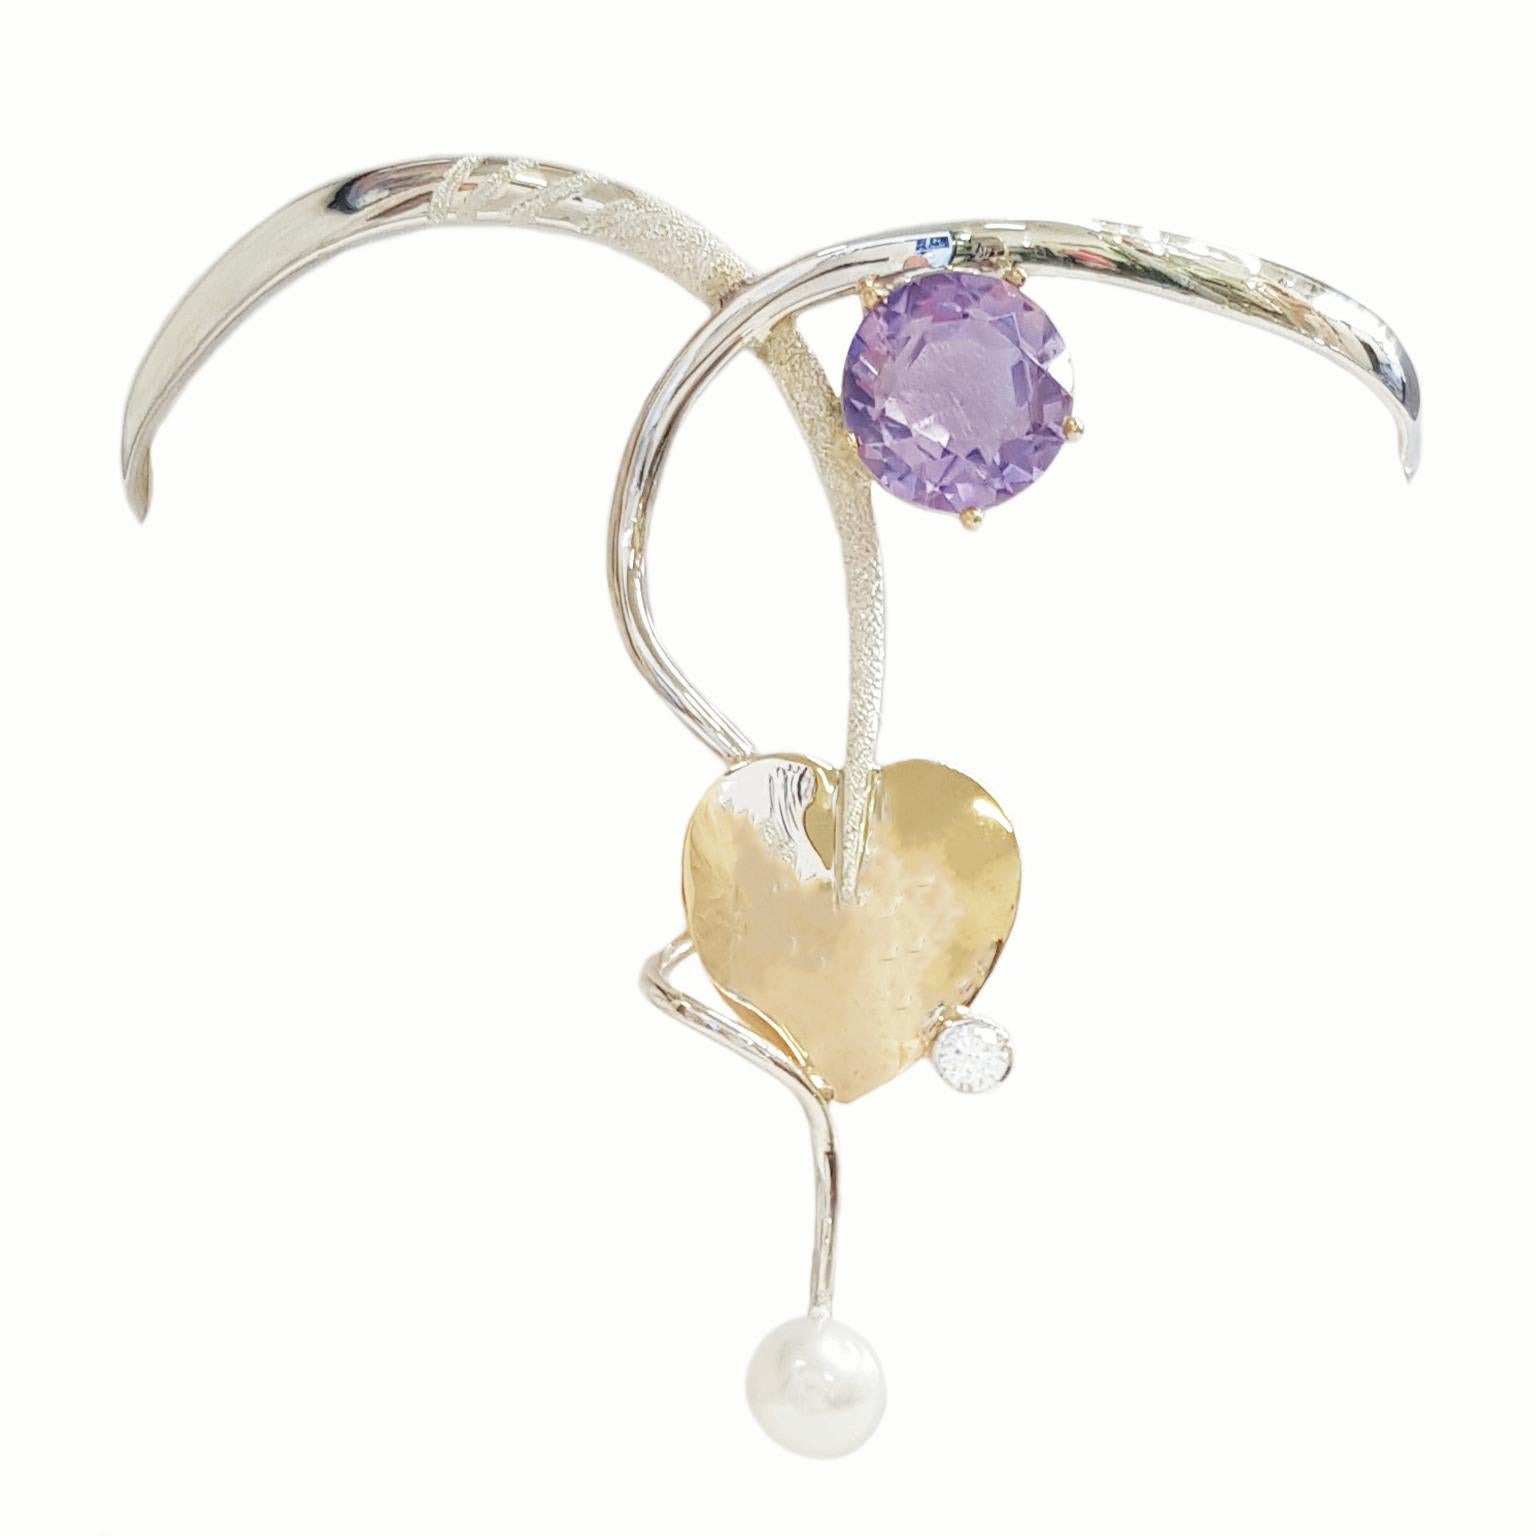 Paul Amey’s armlet bangle is a totally unique and completely handcrafted and created by Paul Amey. This
armlet was crafted from tarnish resistant Sterling Silver, 9K yellow gold, natural amethyst, diamond and pearl.  This armlet has a 9K yellow gold